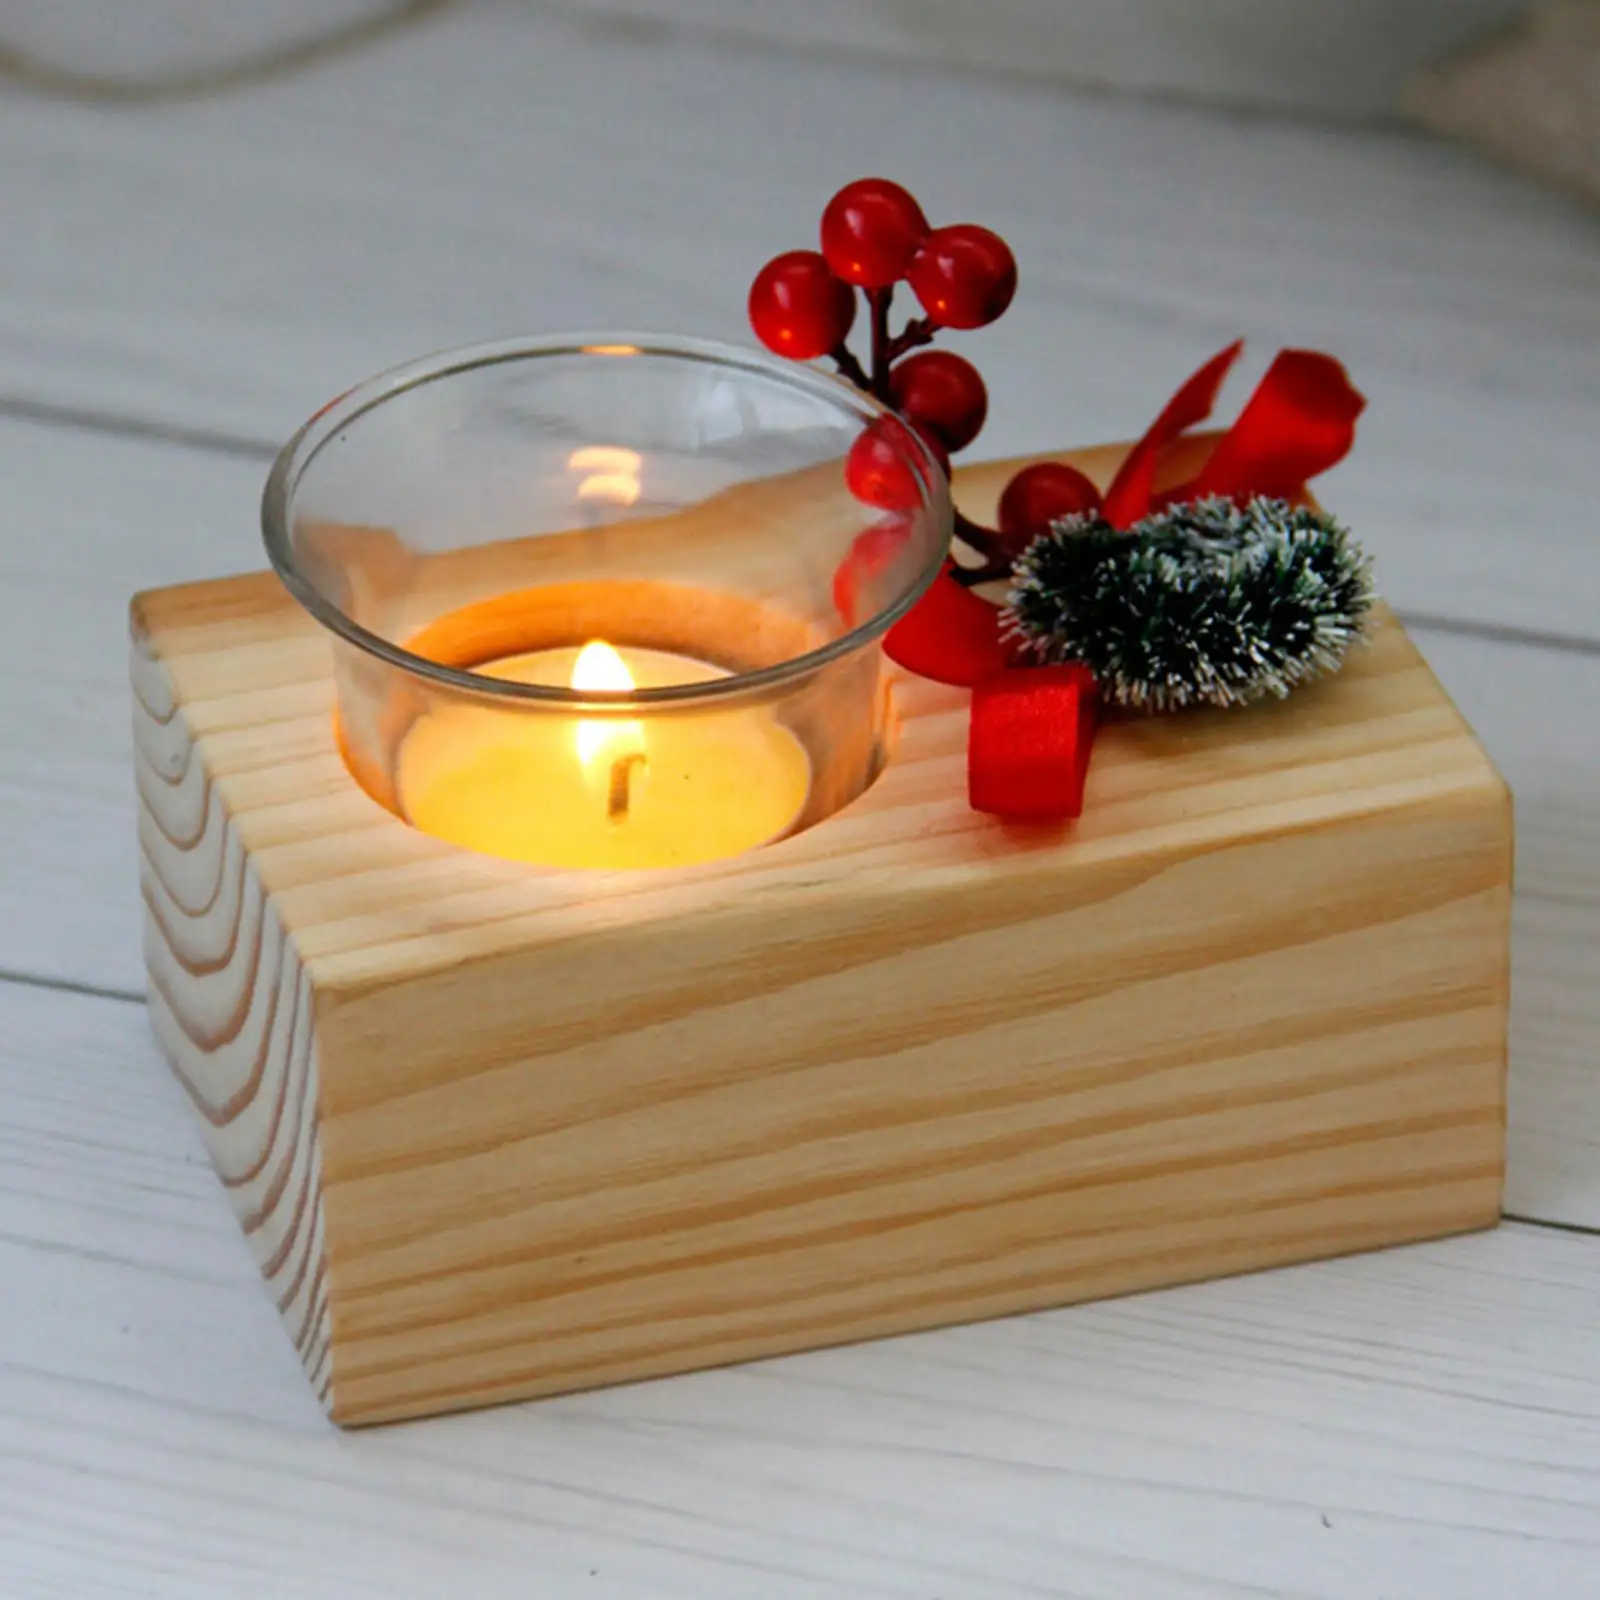 Christmas Wooden Candlestick Ornament Creative Wooden Xmas Tealight Candle Holder for Party Fireplaces Farmhouse Festival Mother